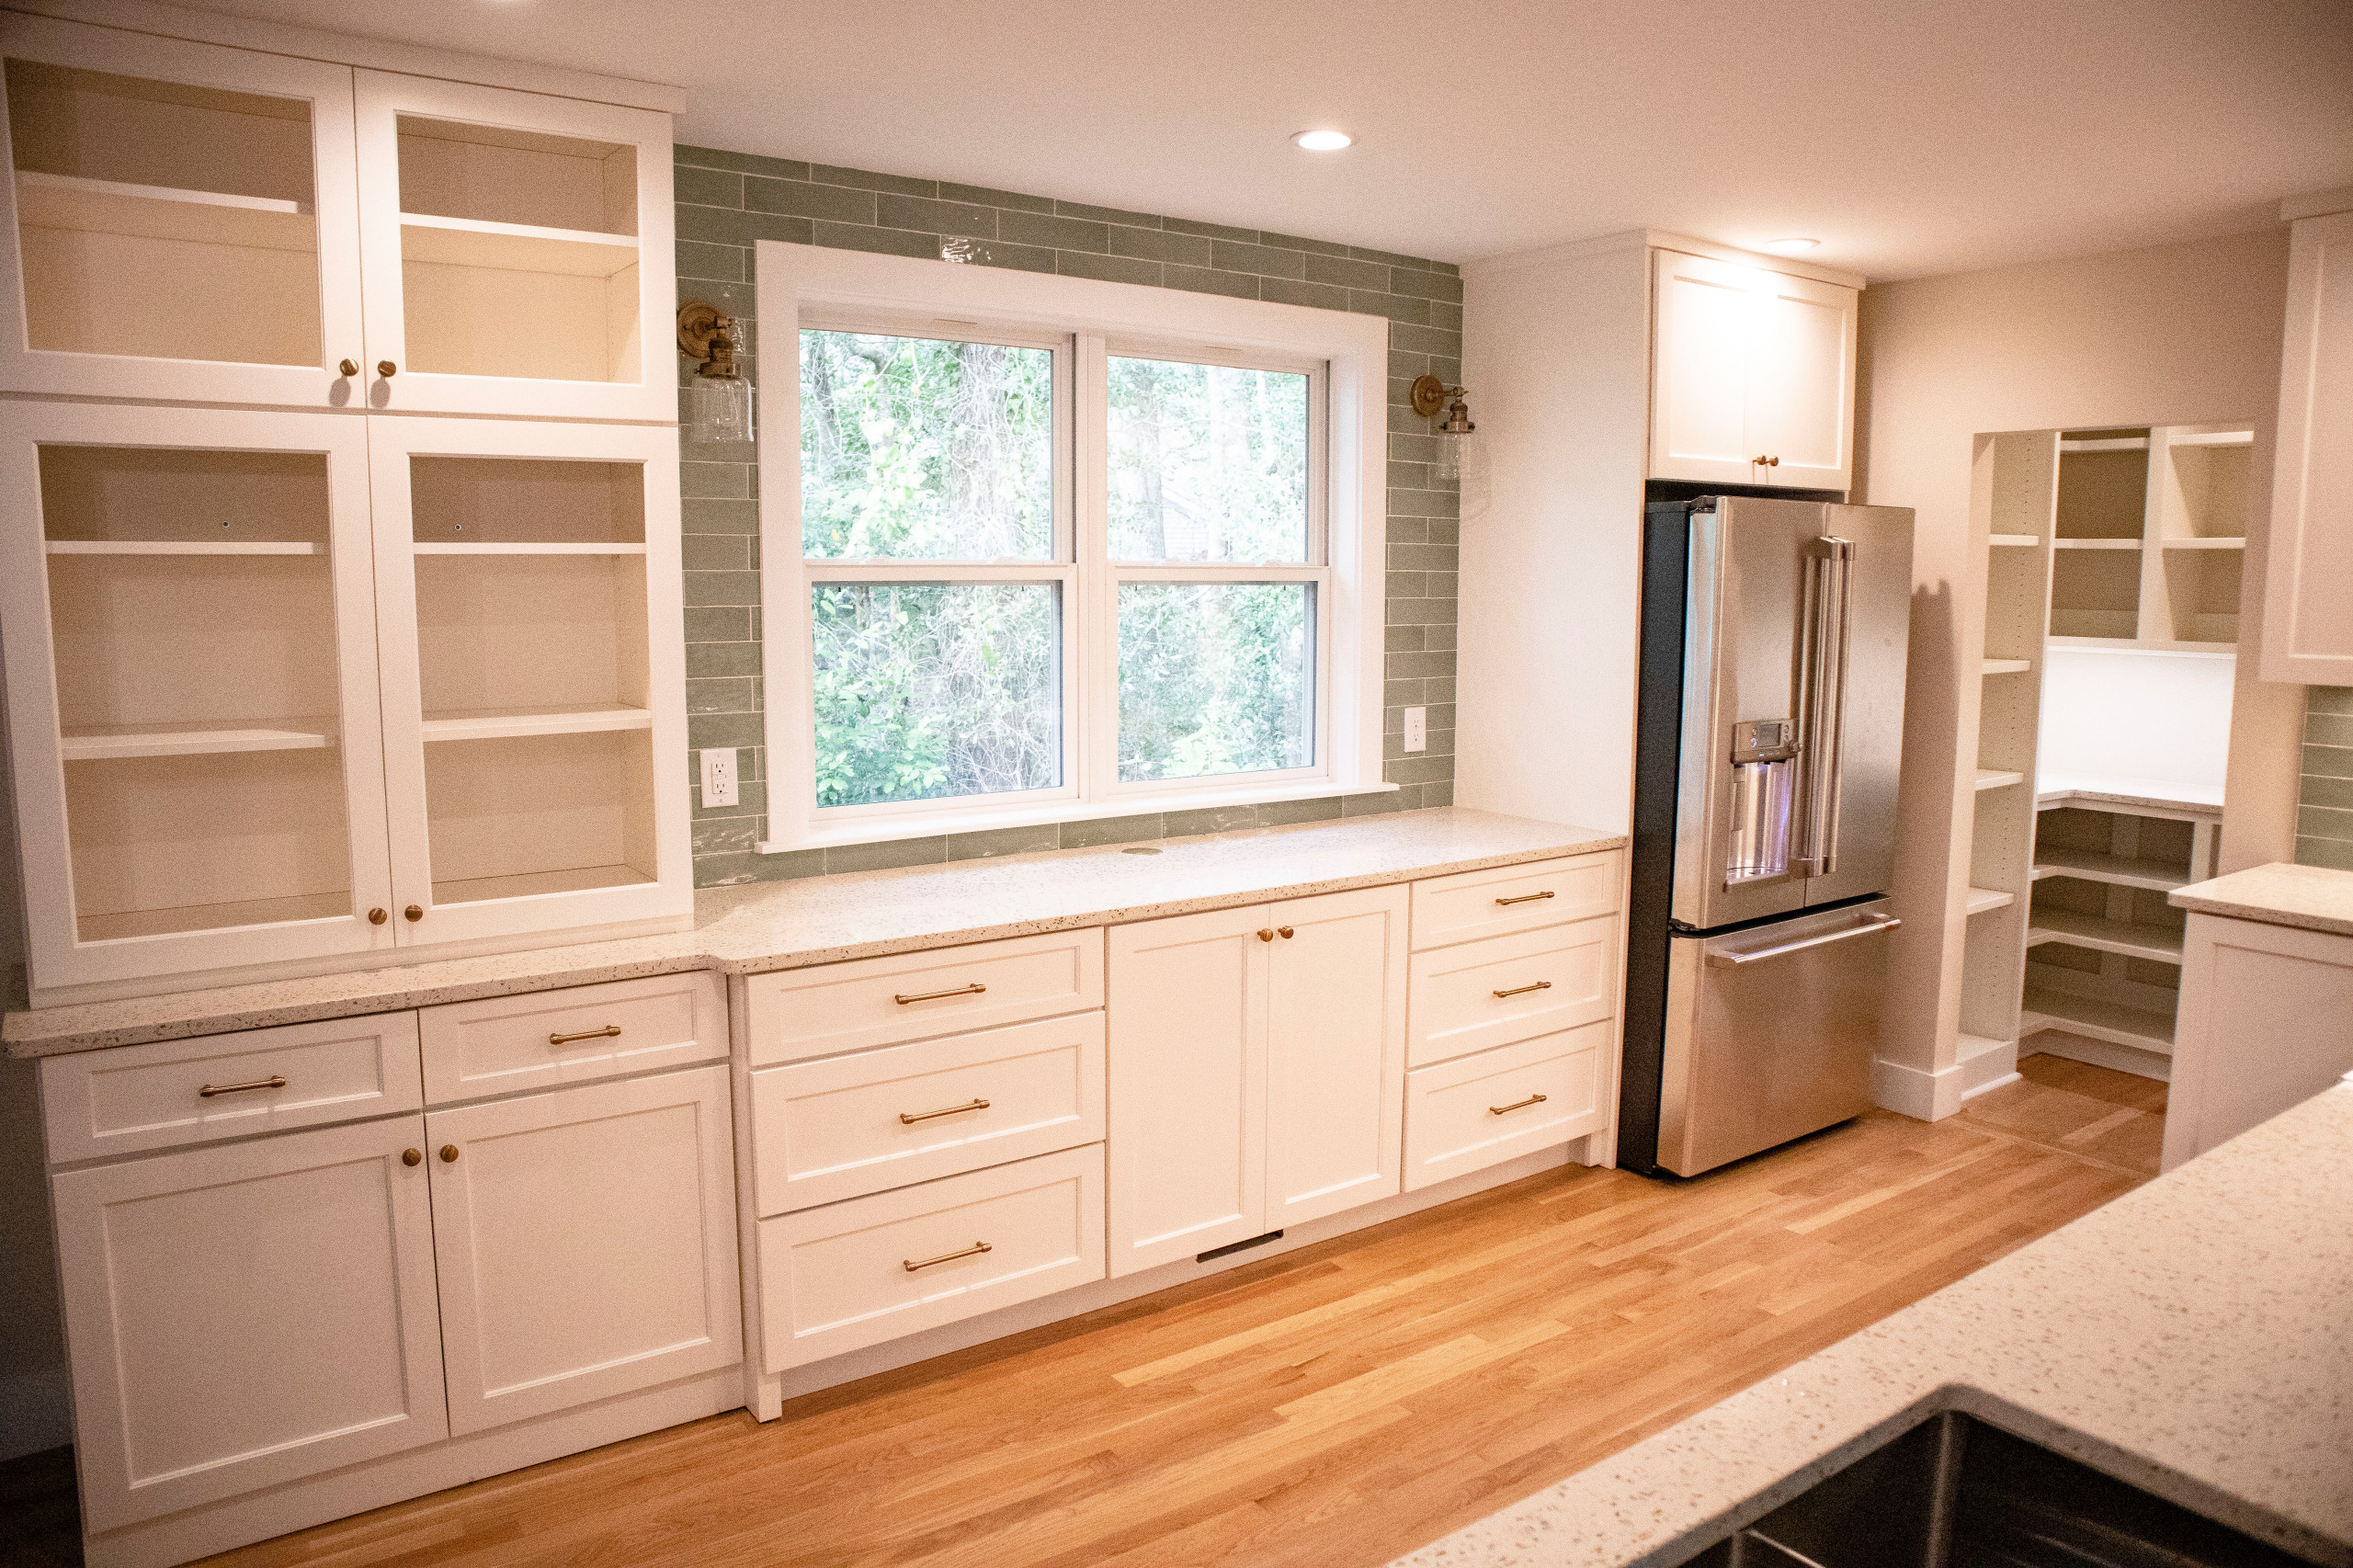 Pine Knoll Shores Remodel